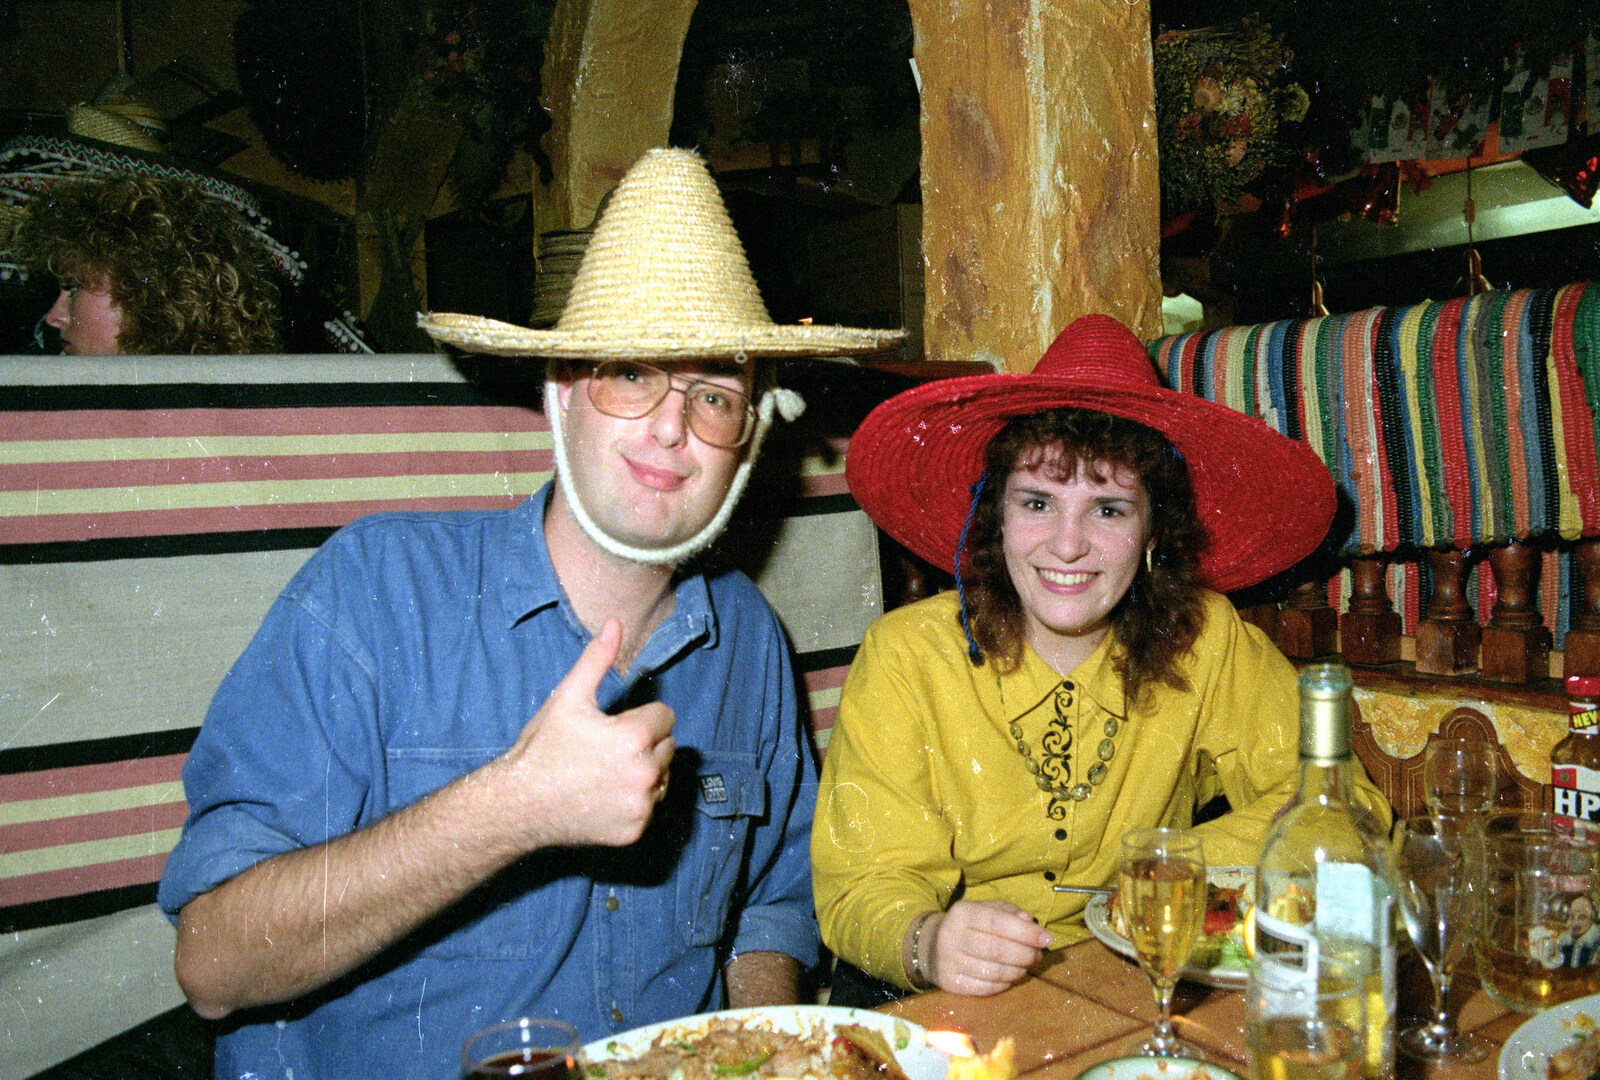 Steve and Sam with comedy hats from Pedros and Daffodils, Norwich and Billingford, Norfolk - 20th April 1991